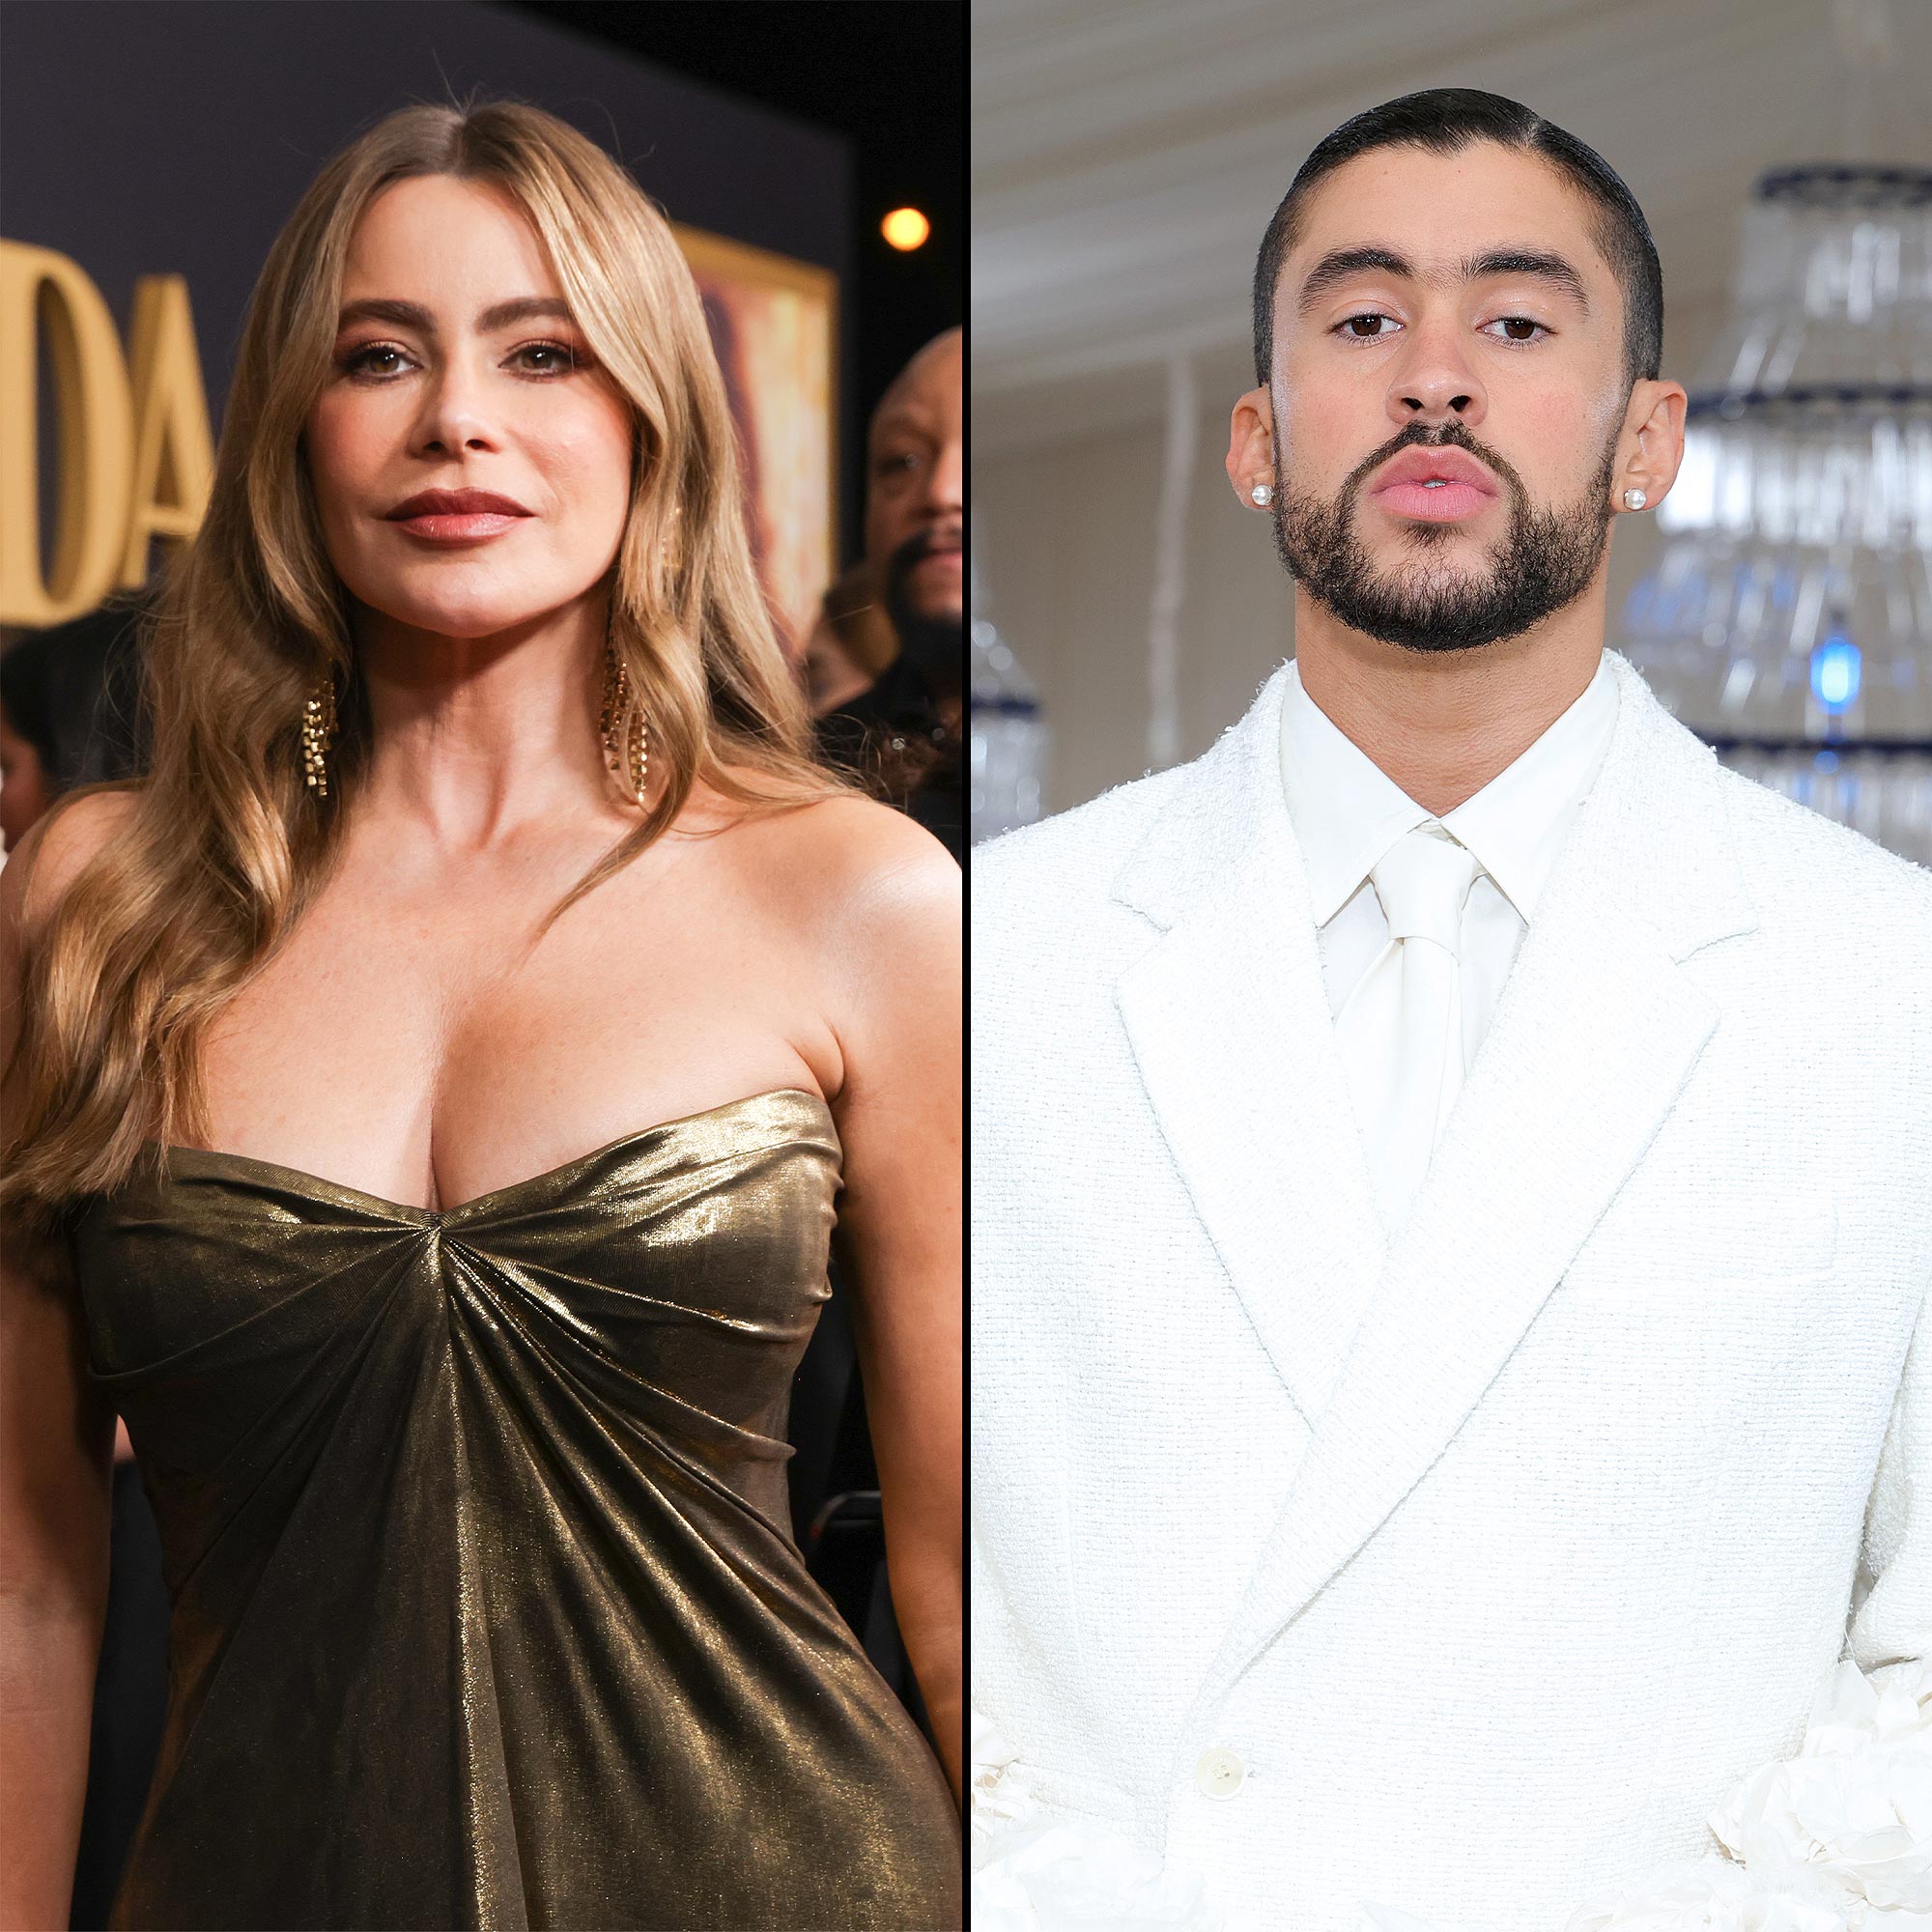 Sofia Vergara Threw Her Phone After Being Featured in Bad Bunny's Song